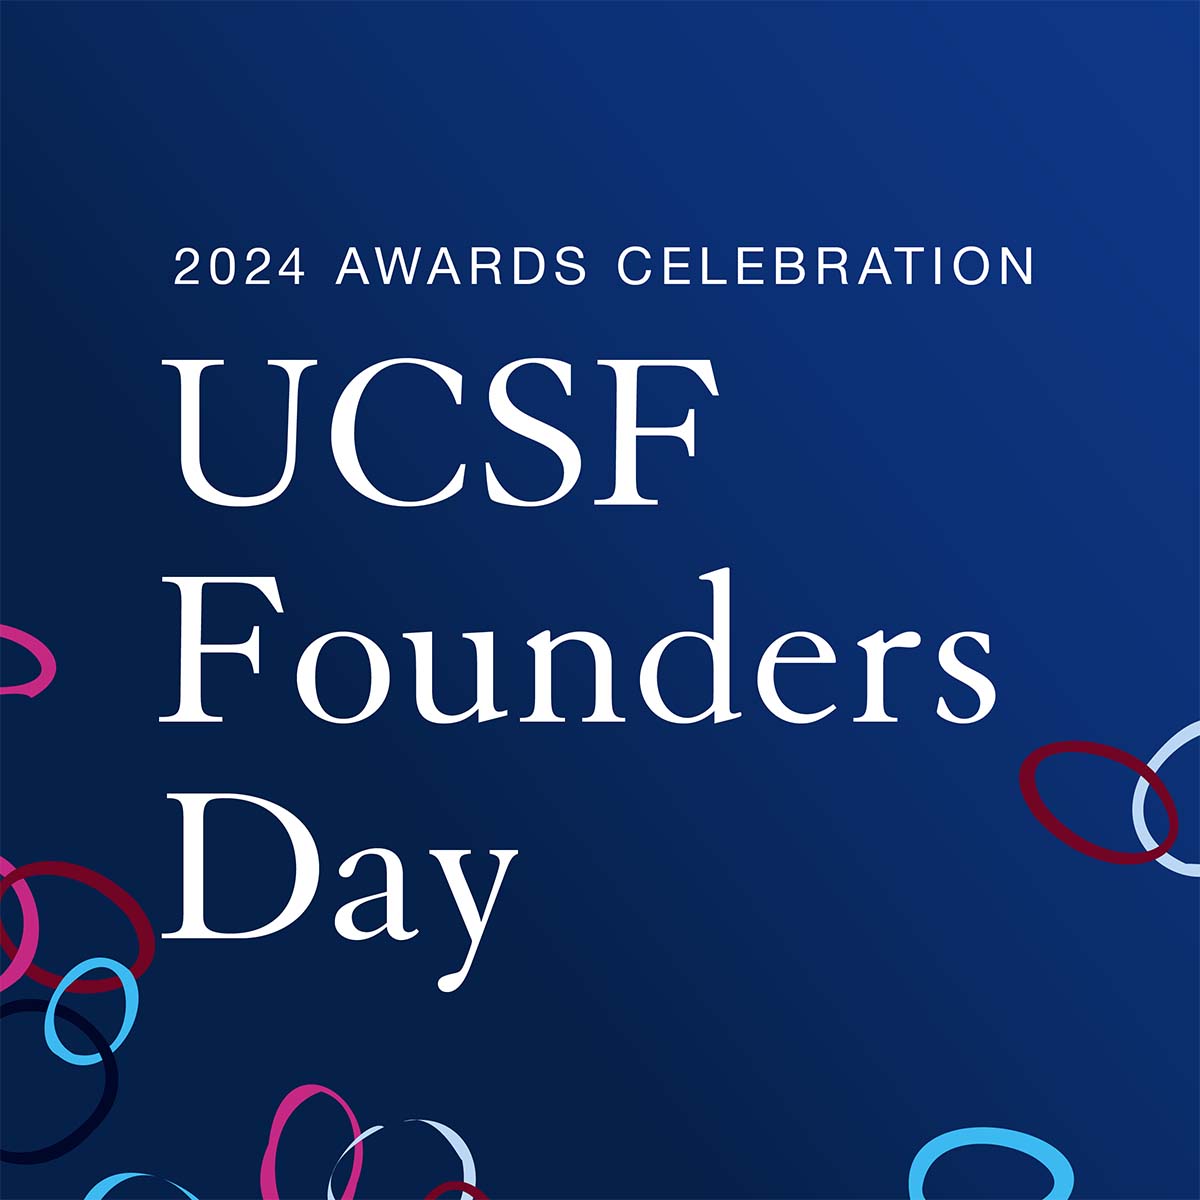 2024 Awards Celebration UCSF Founders Day over a blue background filled with colorful abstract rings.